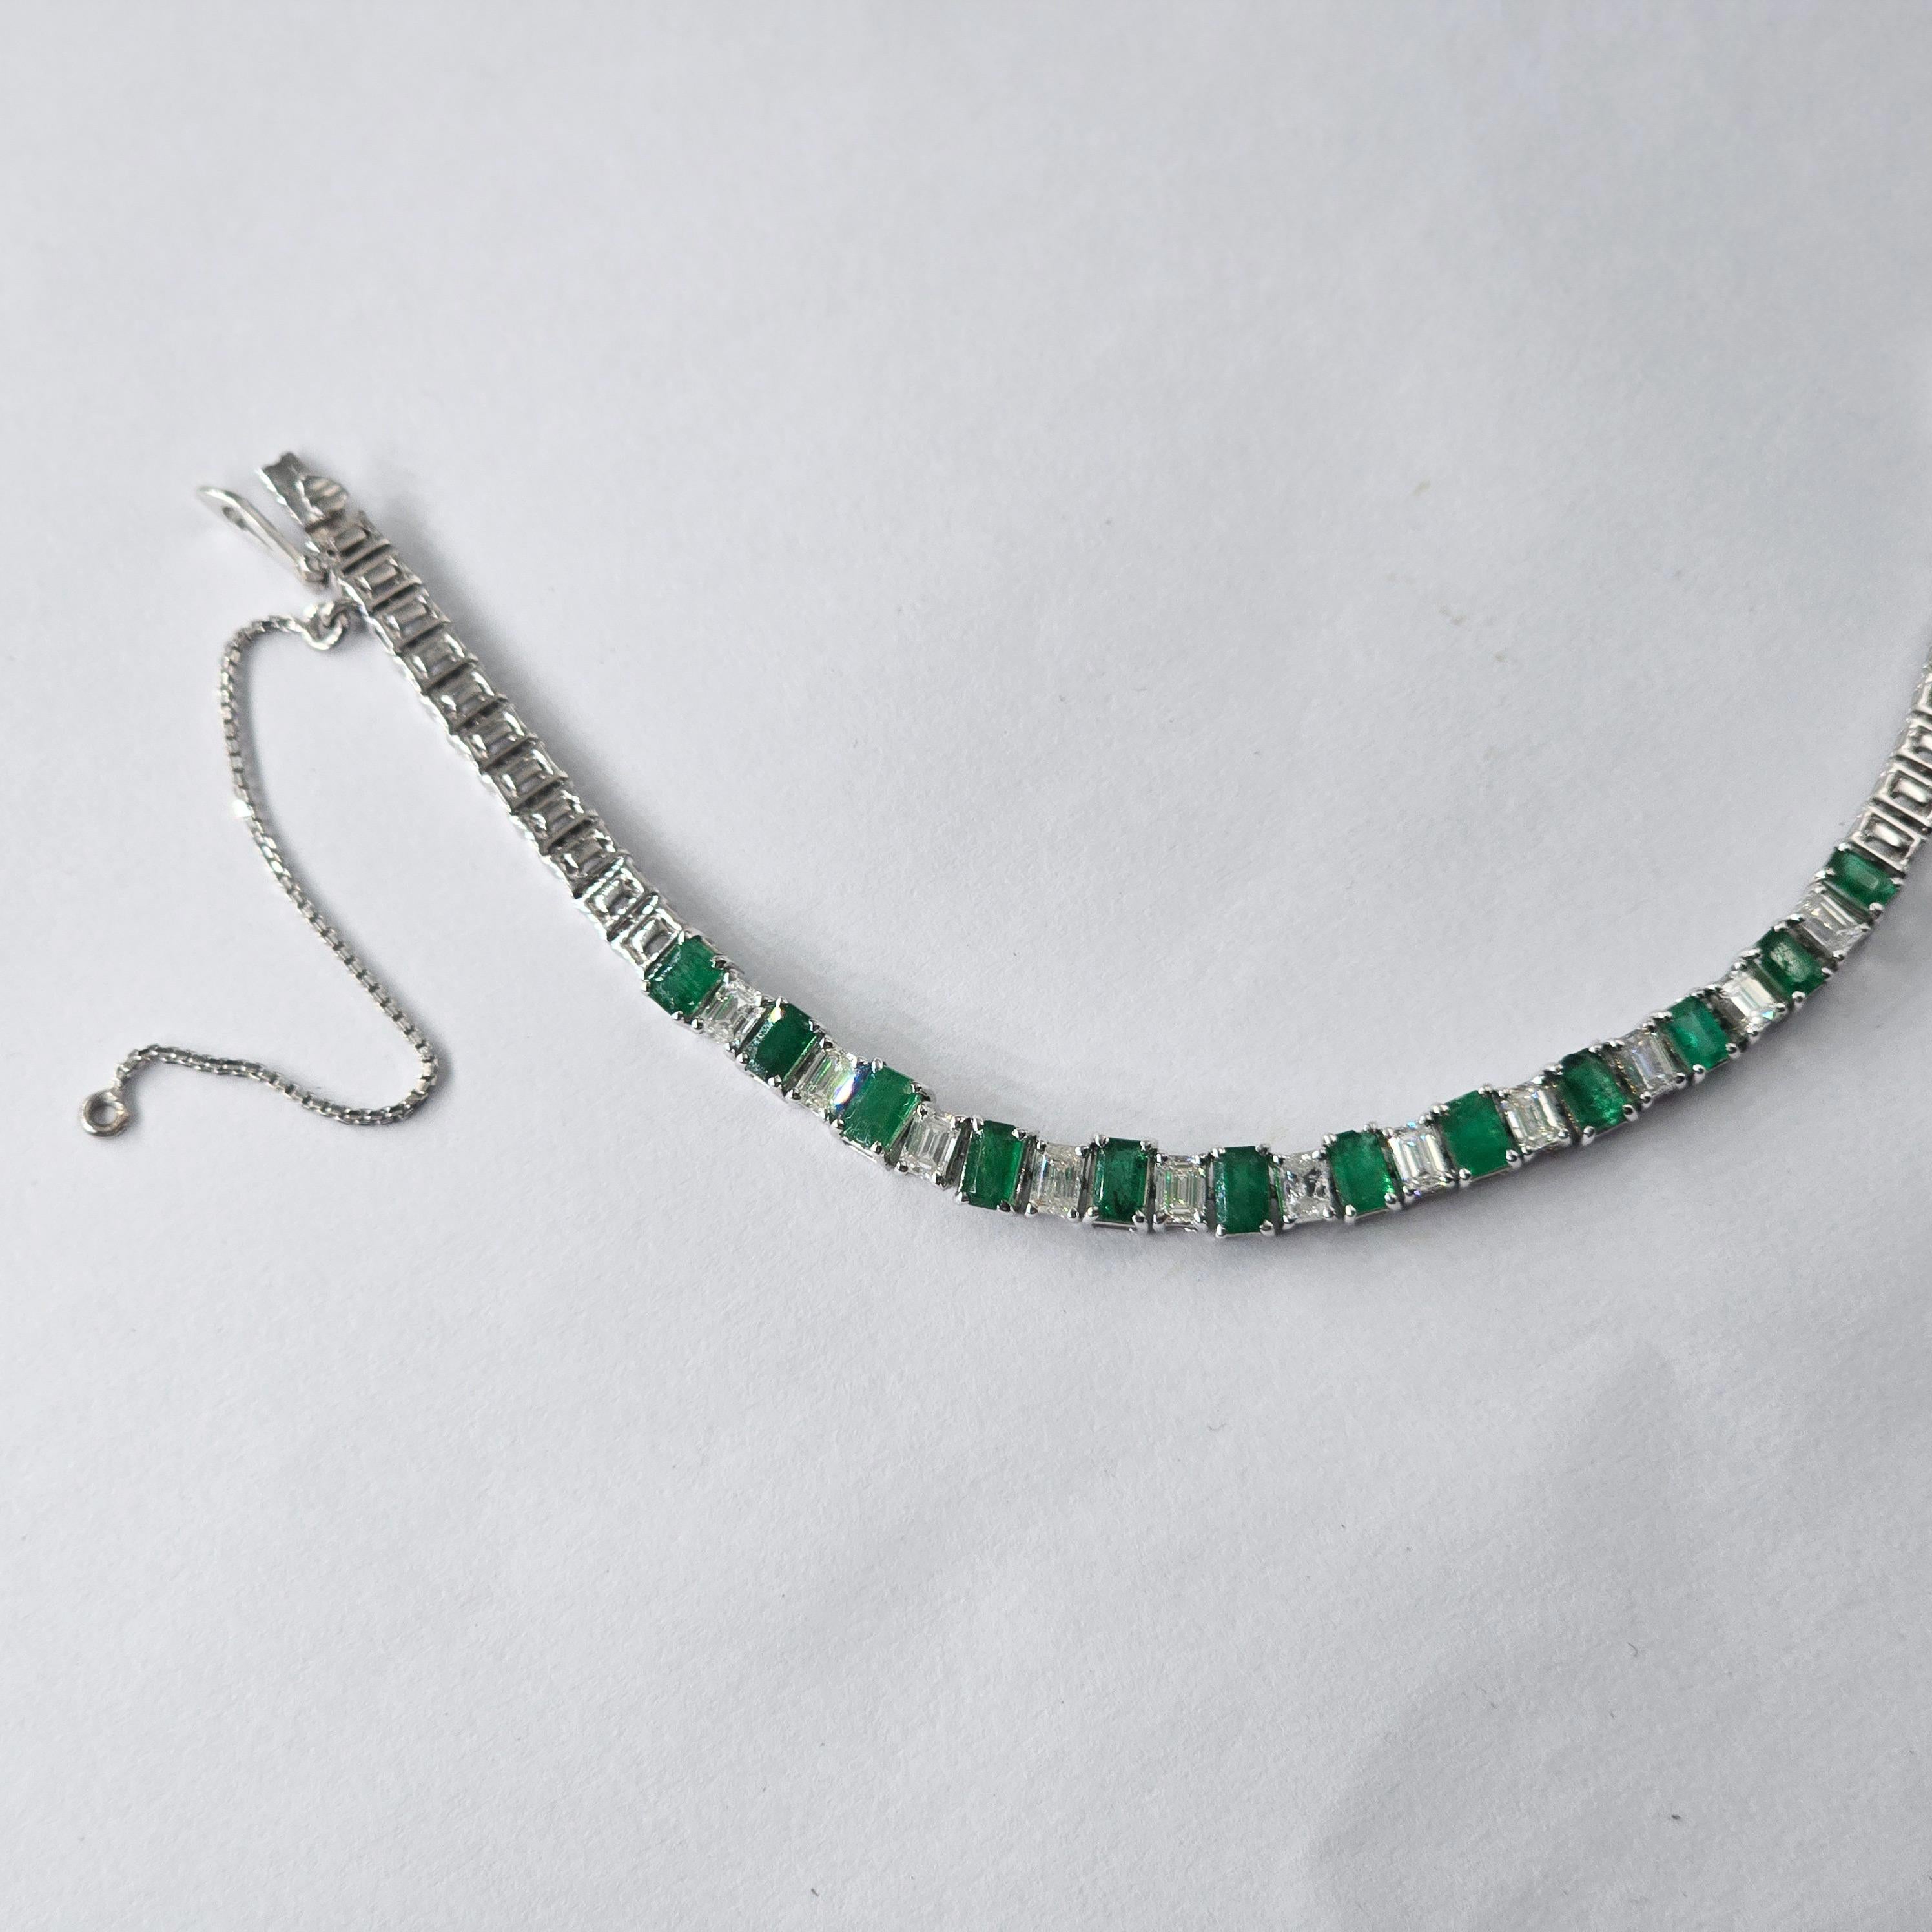 This is a natural Emerald bracelet with diamonds and 14k gold. The emeralds are very high quality and very good quality diamonds the clarity is vsi and G colour


Emeralds : 3.65 carats
diamonds : 2.54carats
gold : 12.189 gm

This is a brand new